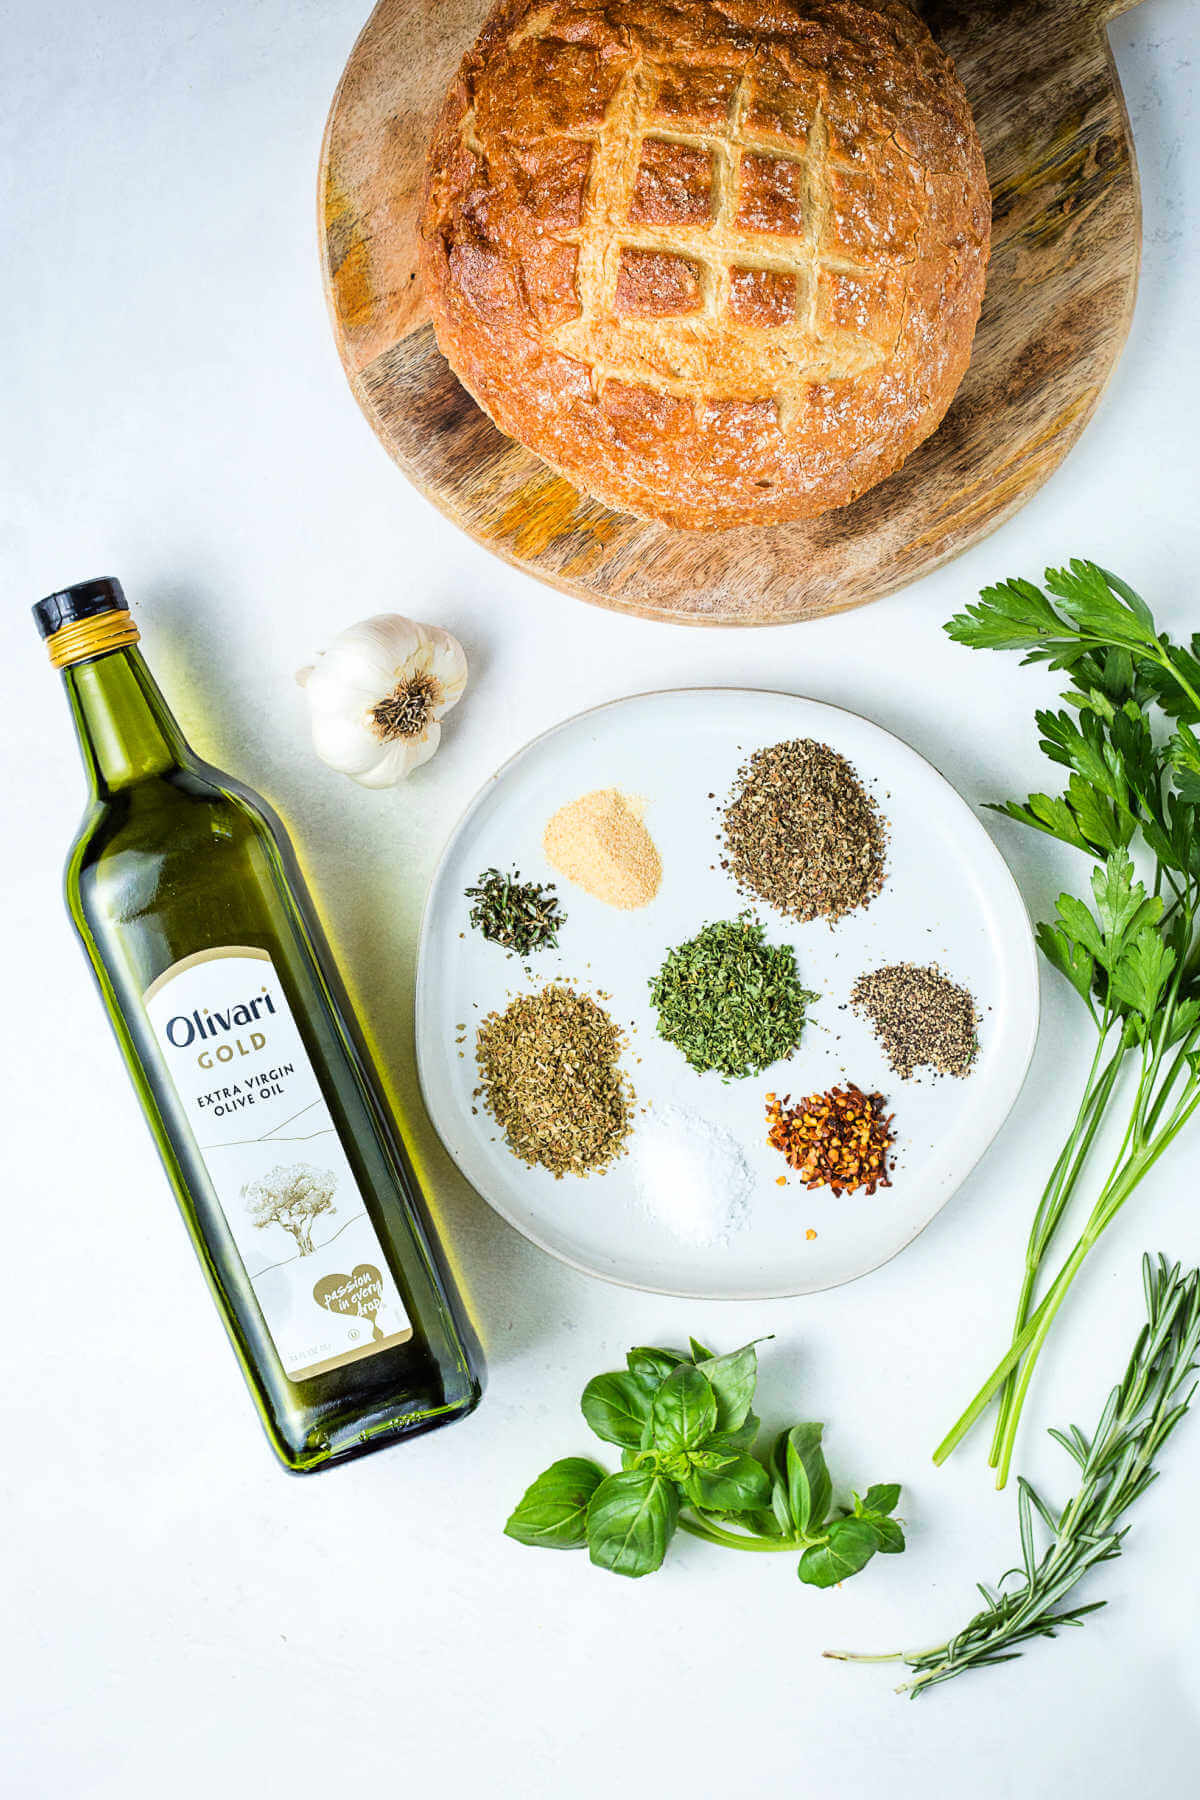 ingredients for olive oil bread dip on a table.